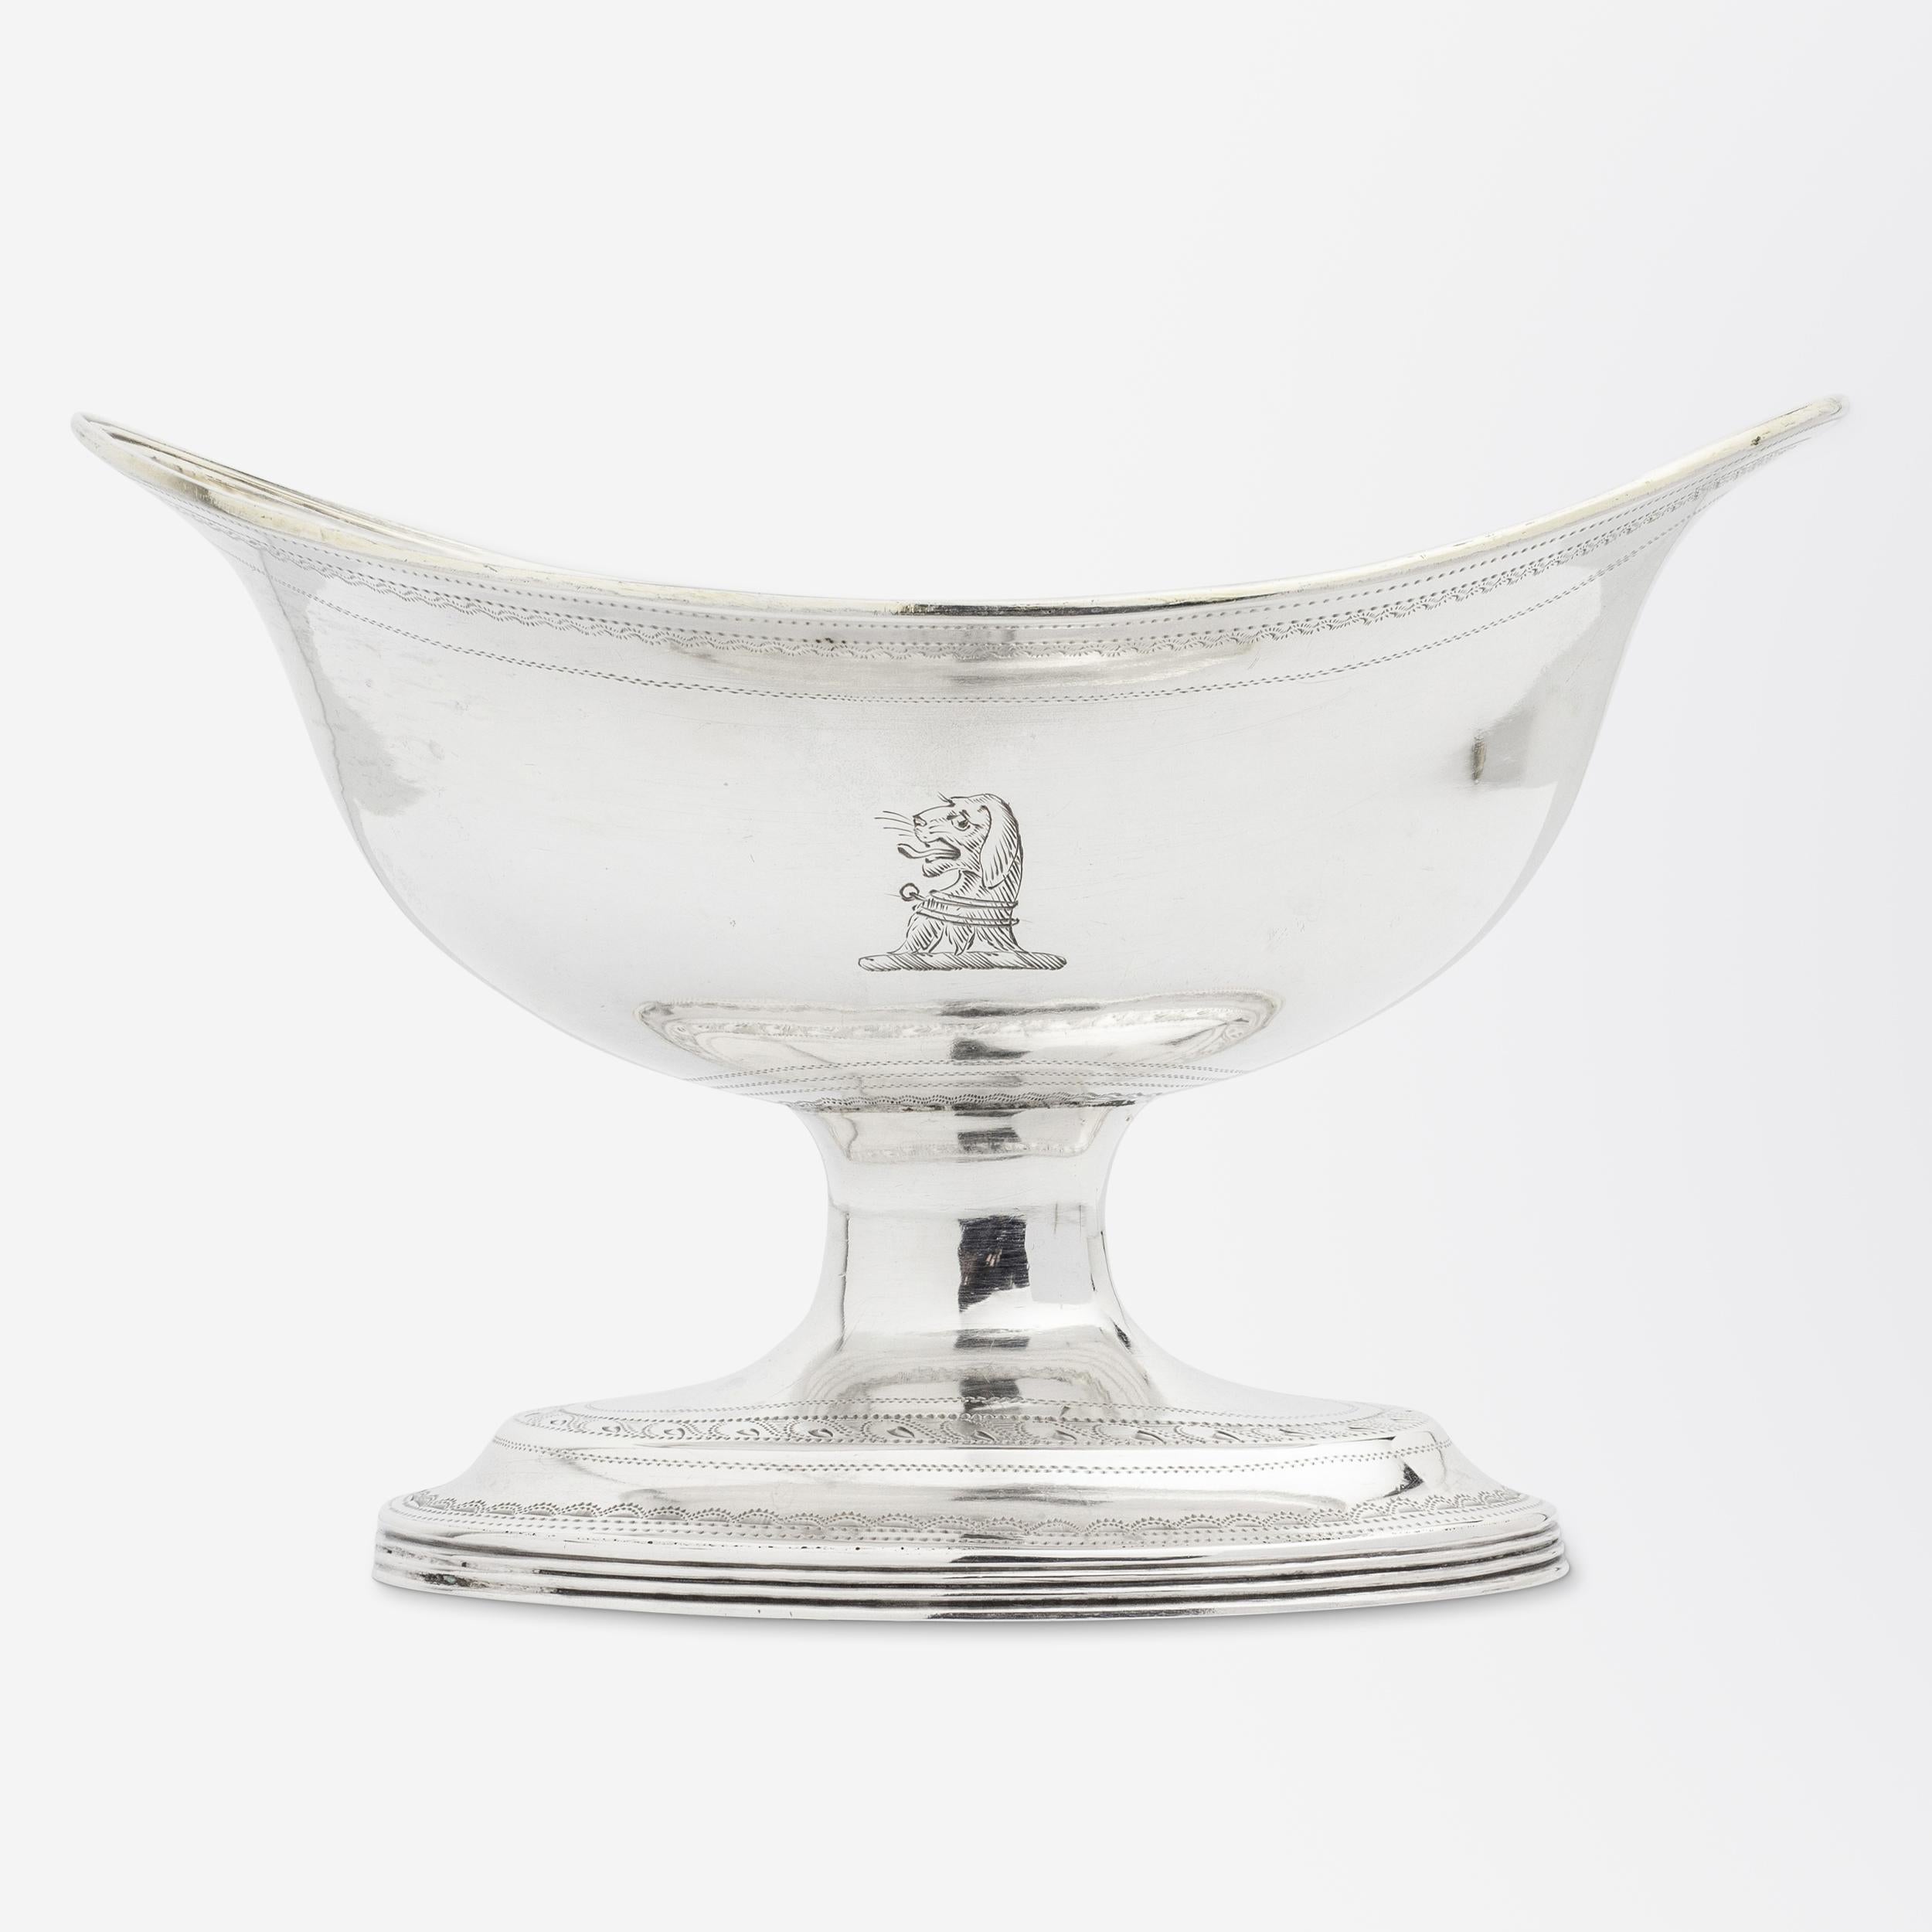 A George III period sterling silver salt cellar with a gilt wash interior and hand-chased details by two members of the famed English silversmithing family, Peter & Ann Bateman. An engraving to the front shows a dog's head crest and to the interior